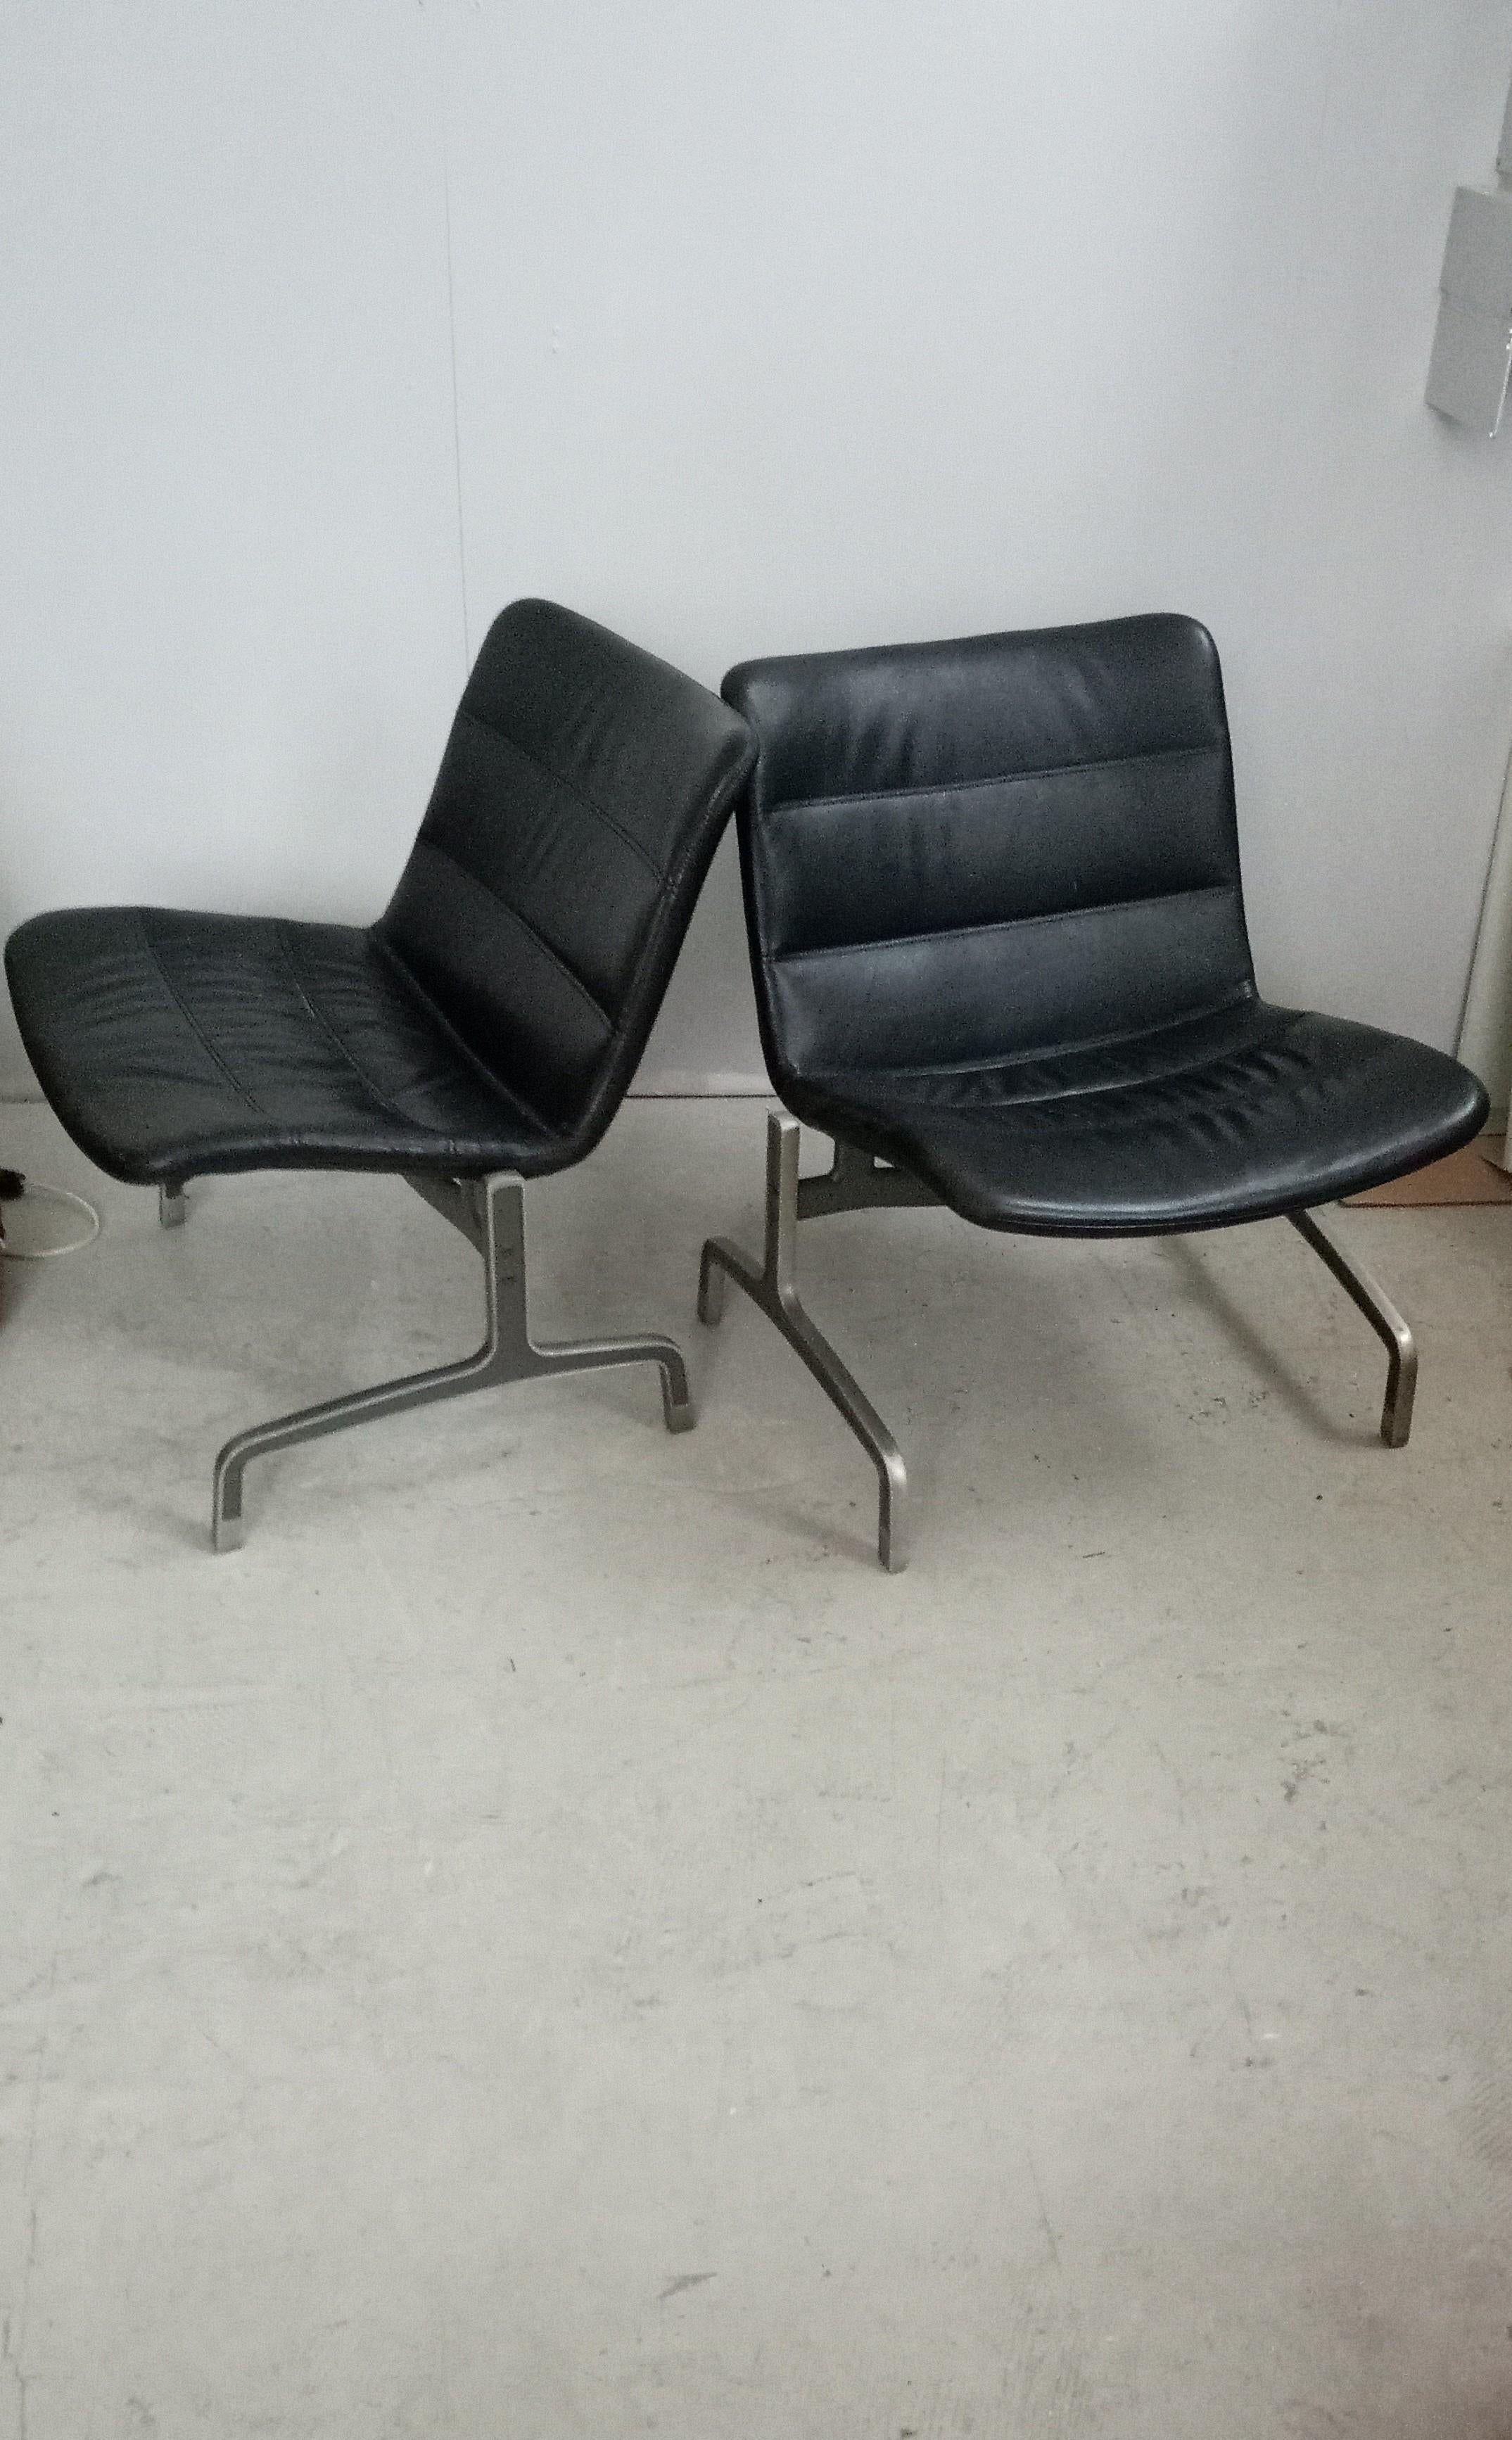 Pair of leather armchairs with aluminium base designed by Jorgen Kastholm for company Kusch and co.
